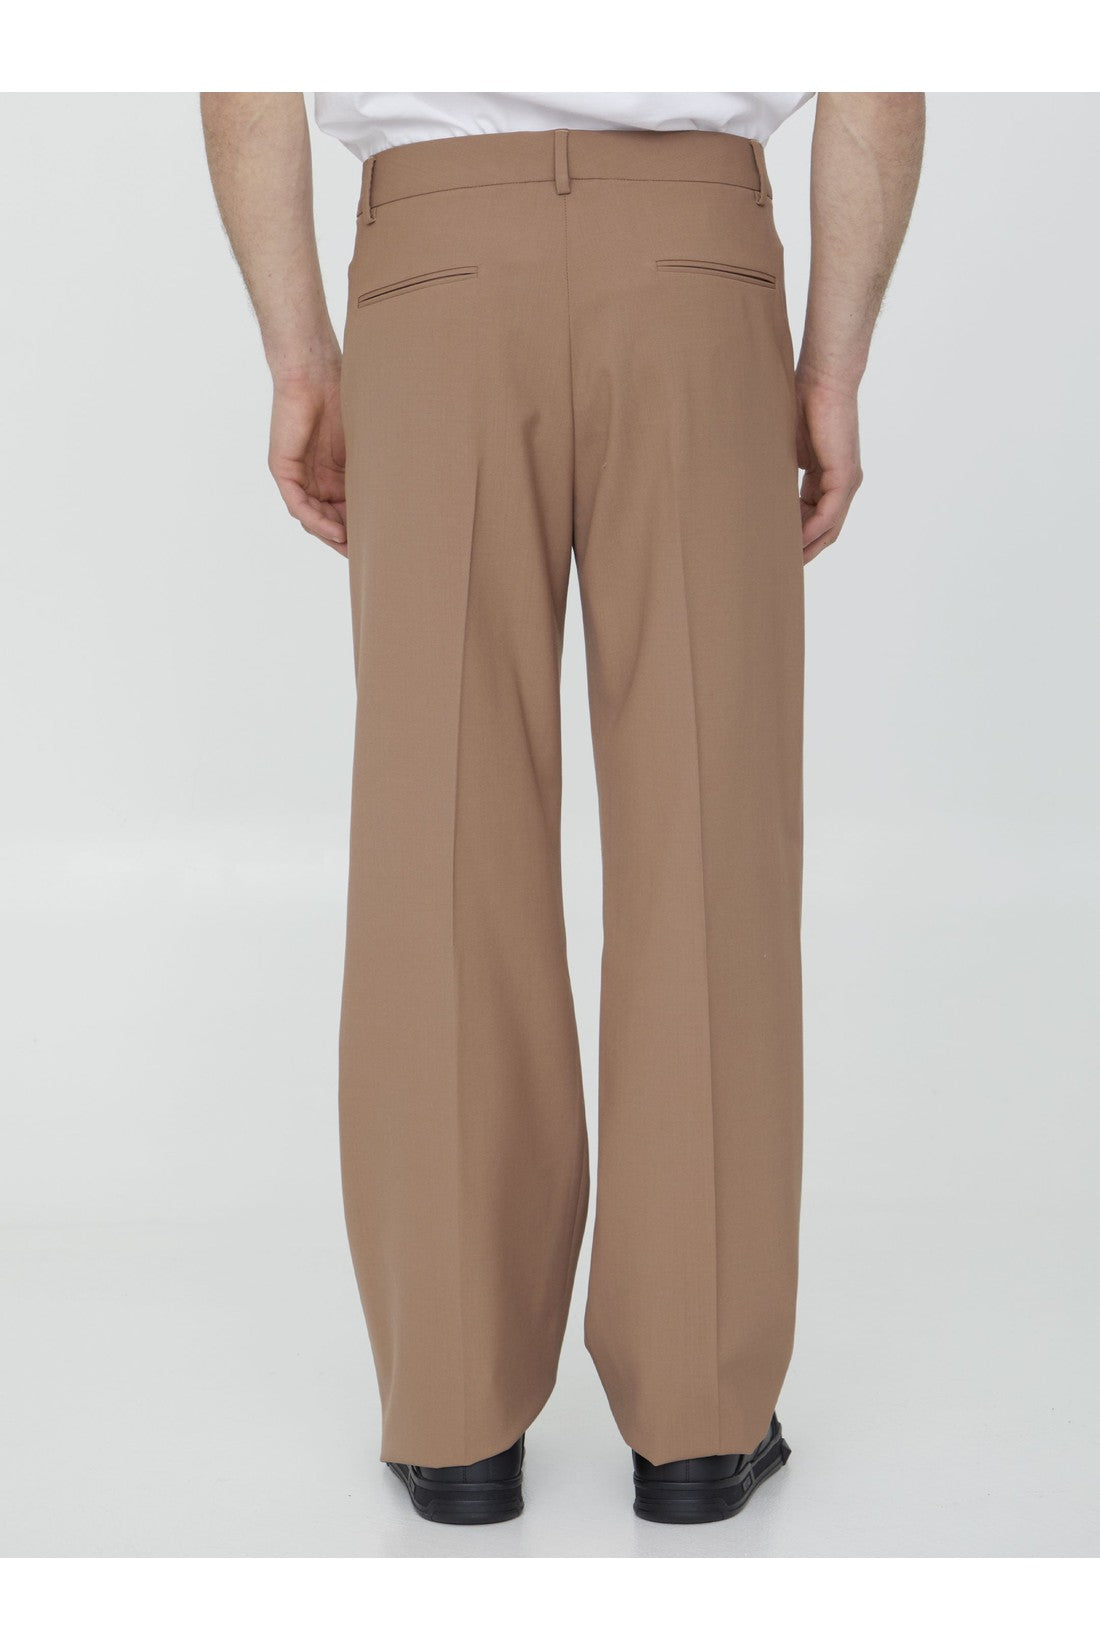 Wool tailored trousers